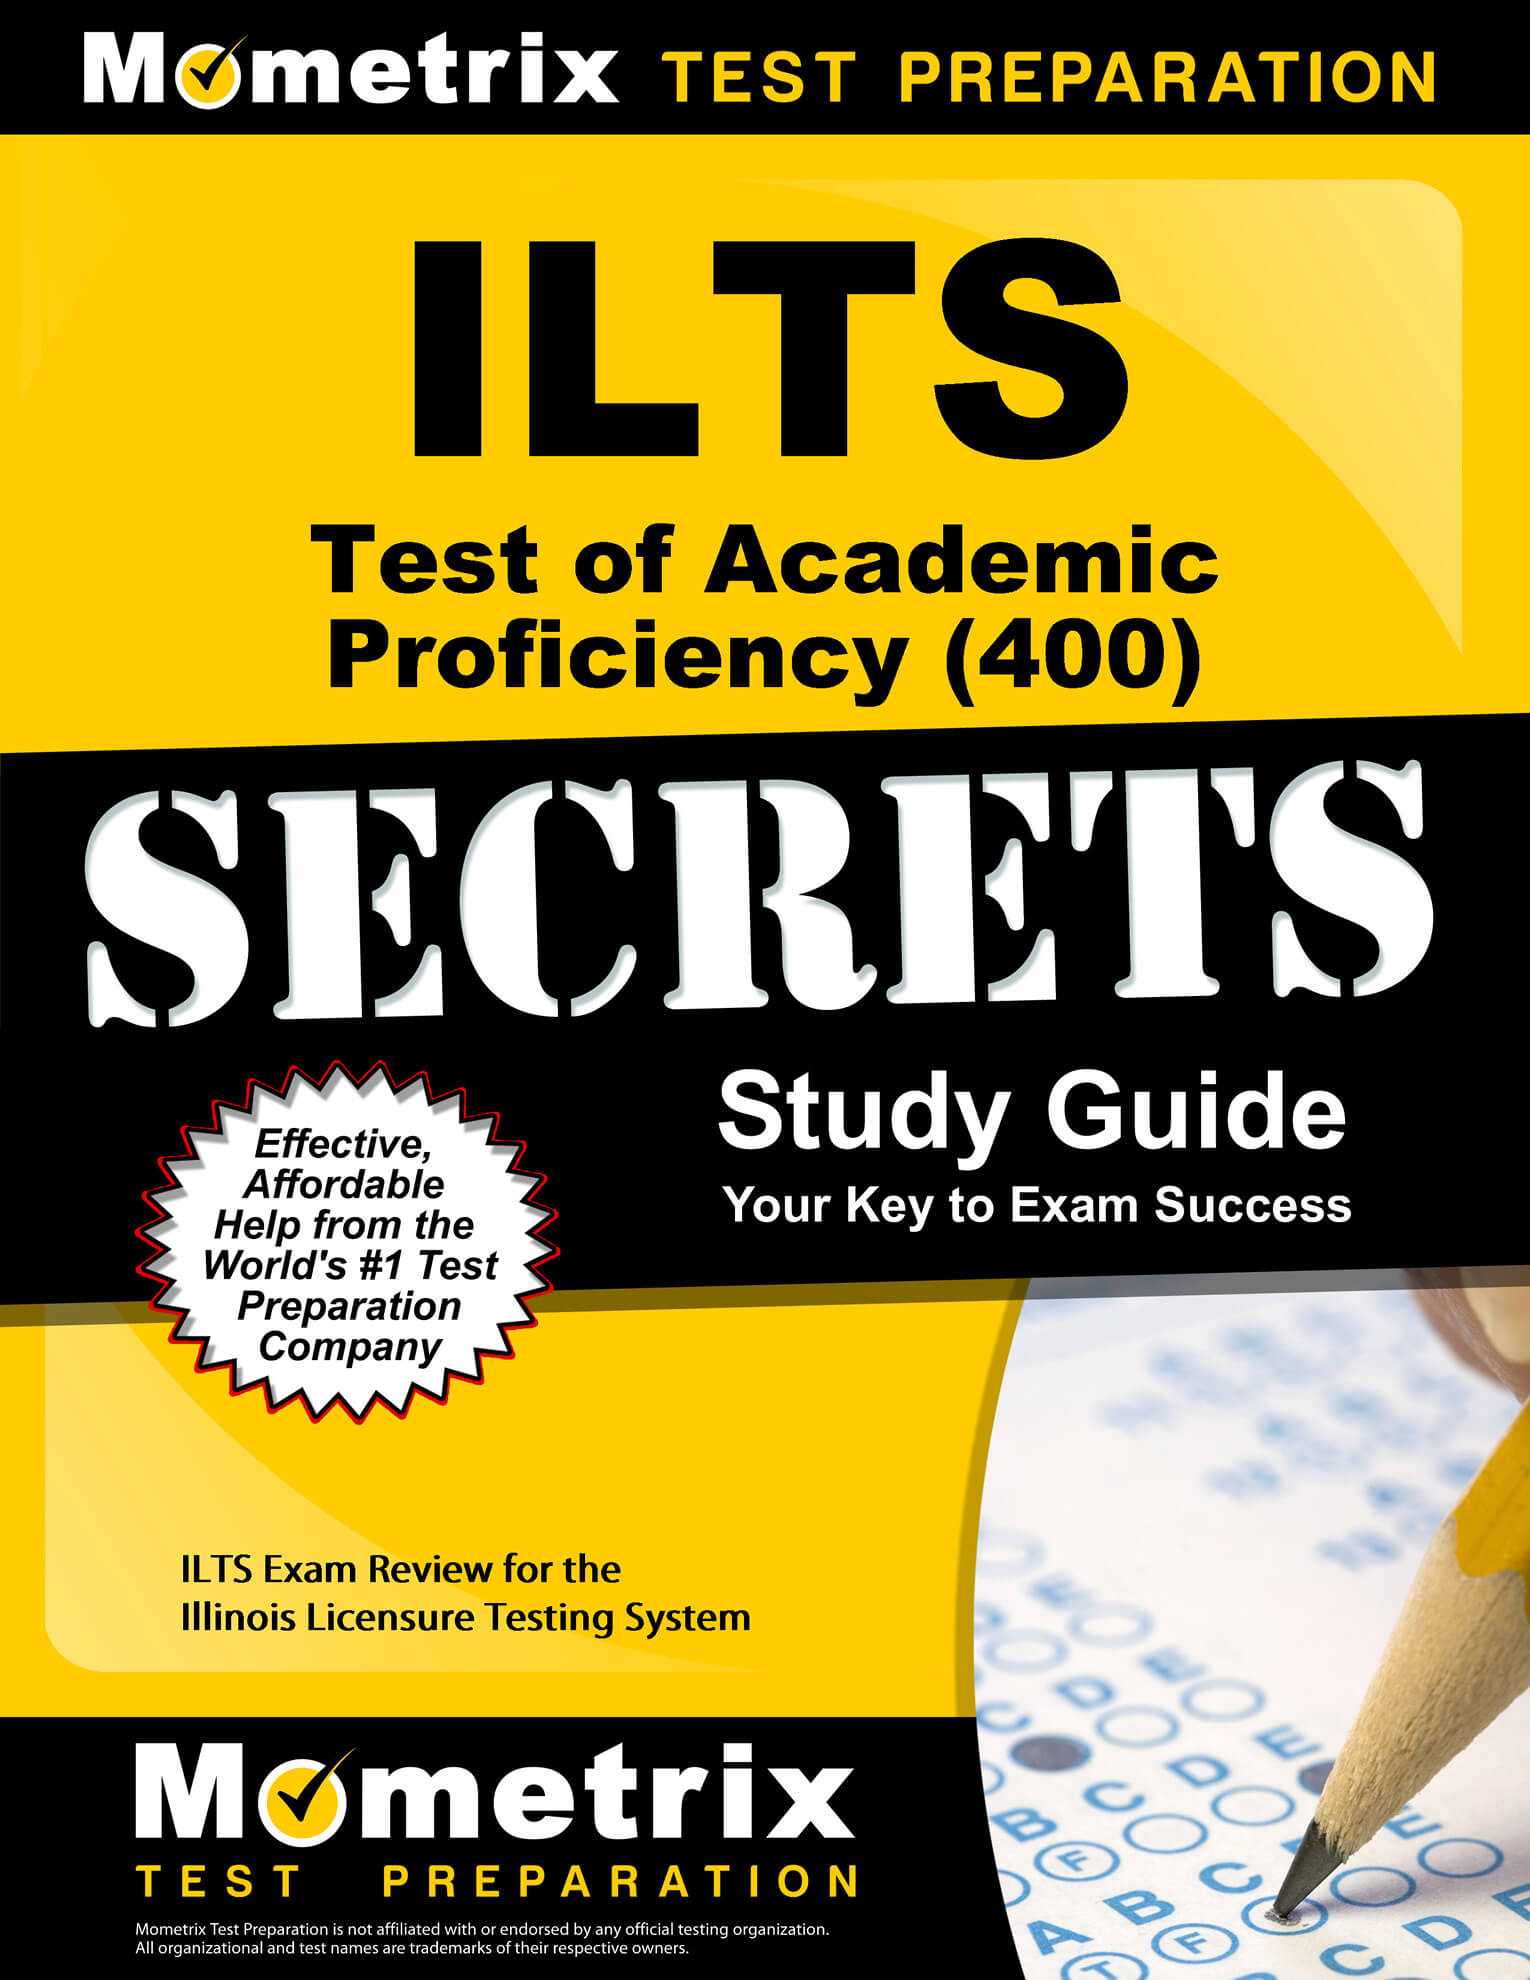 ILTS Test of Academic Proficiency Study Guide